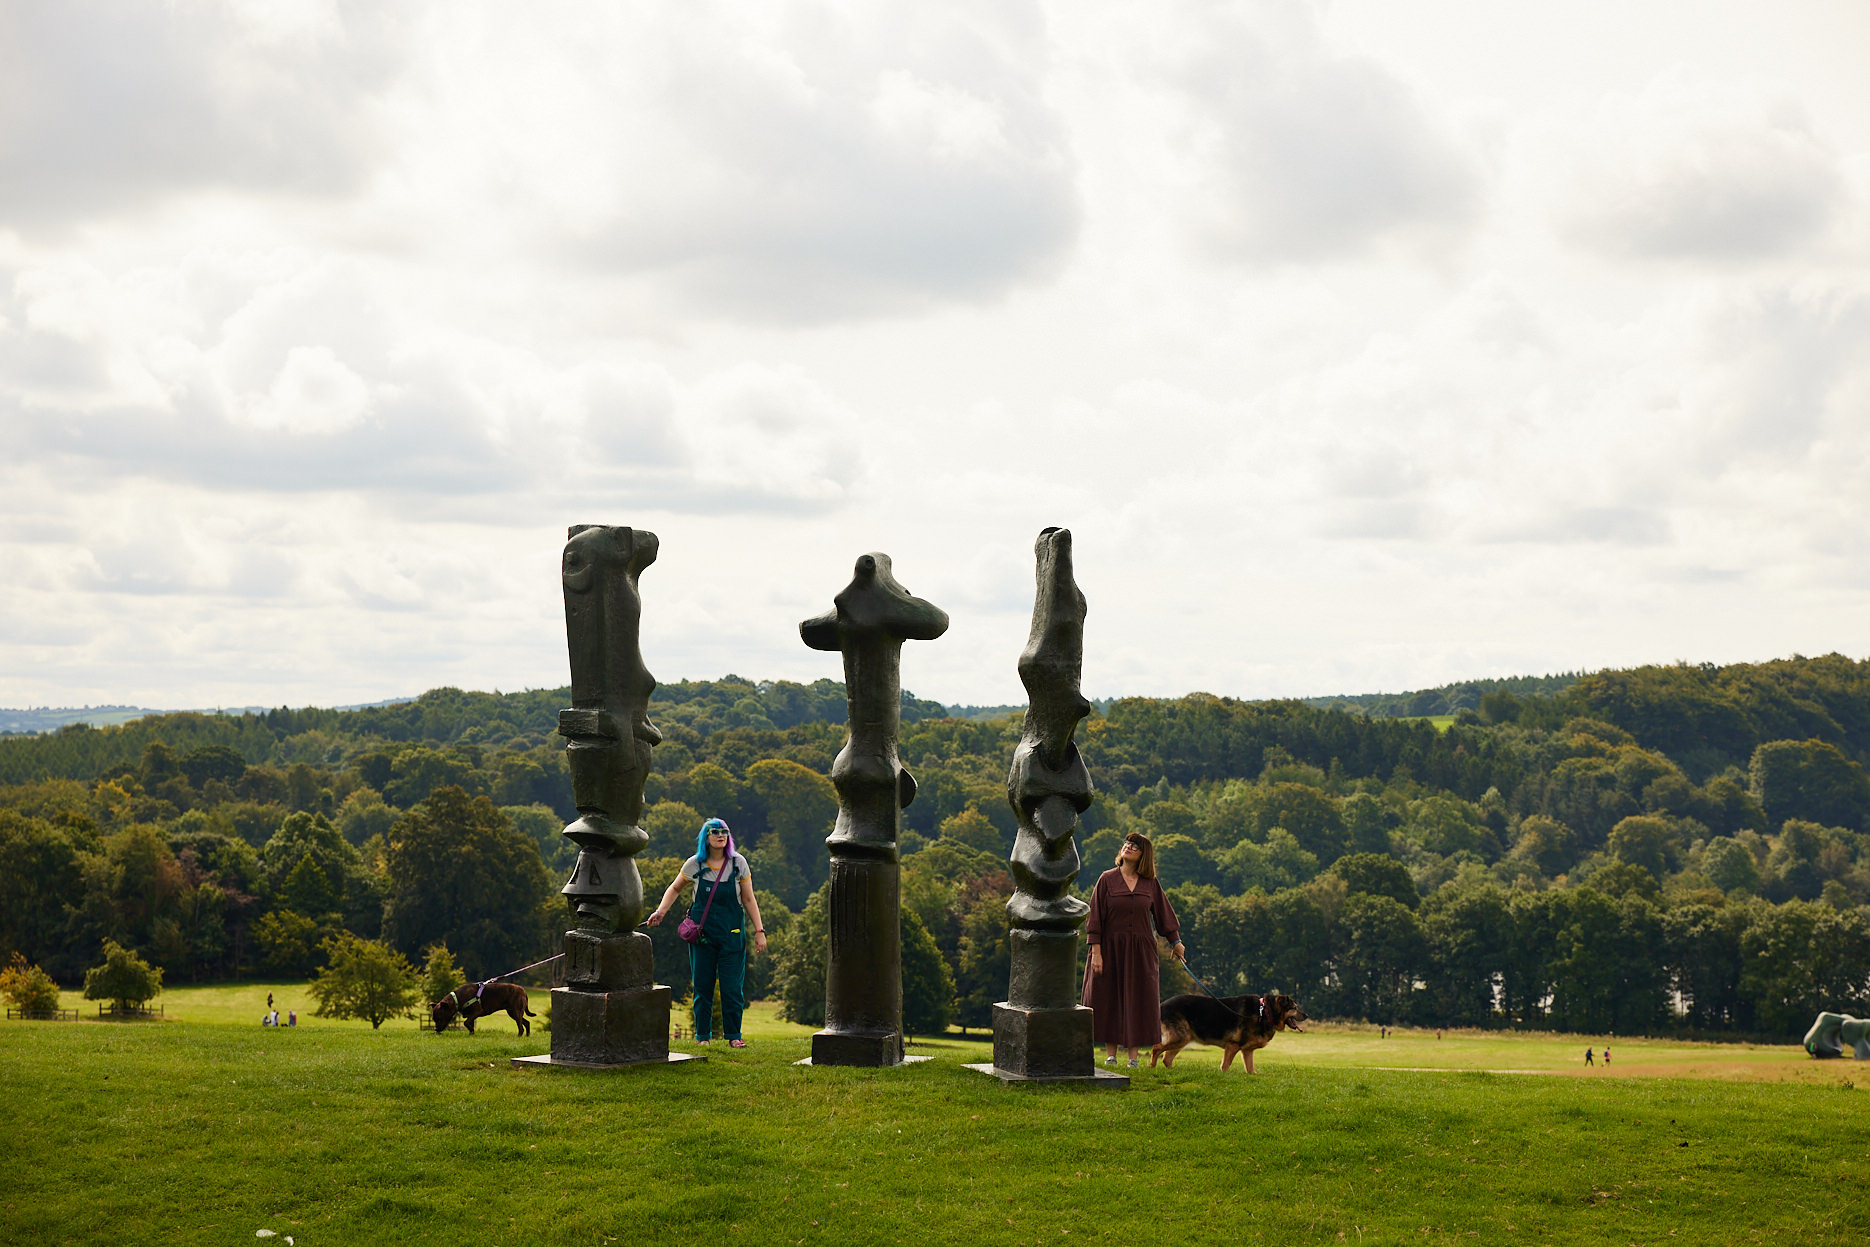 Dog walkers looking at three tall thin bronze sculptures looking out over the landscape